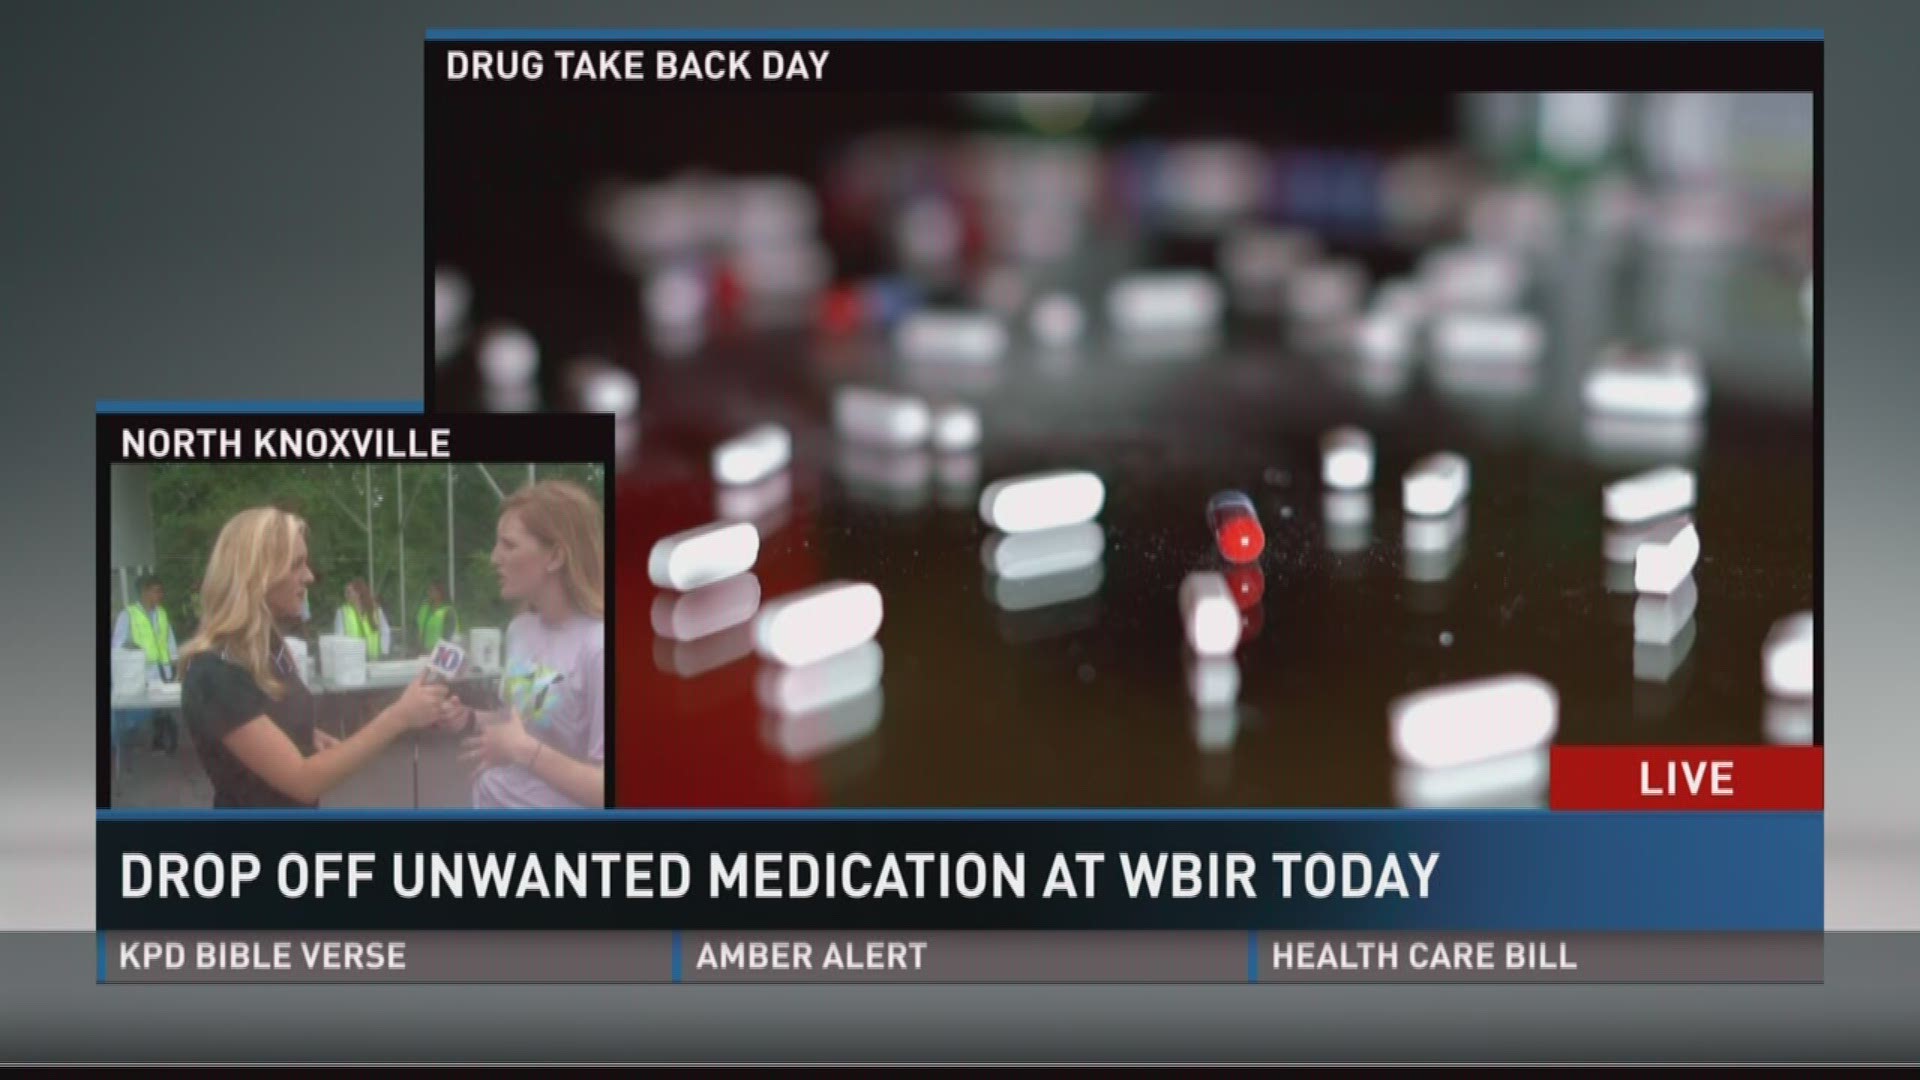 All afternoon Friday WBIR took in unwanted medication for safe disposal.